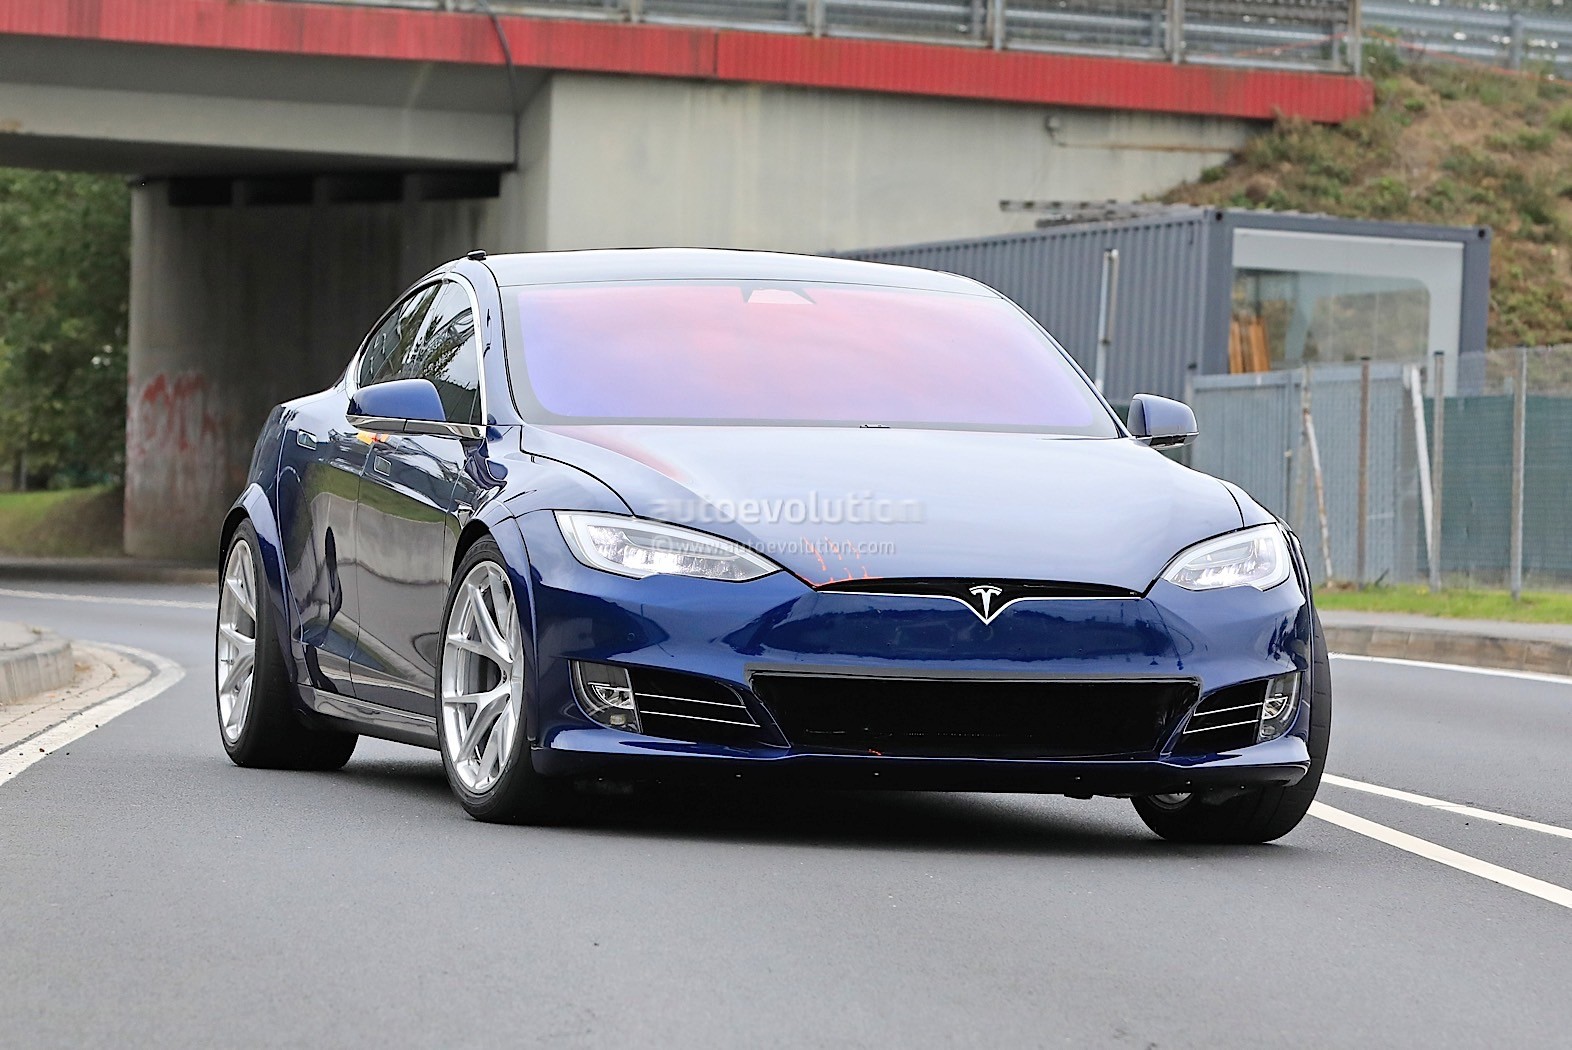 tesla model s plaid attempts nurburgring record attempt but doesn t improve time